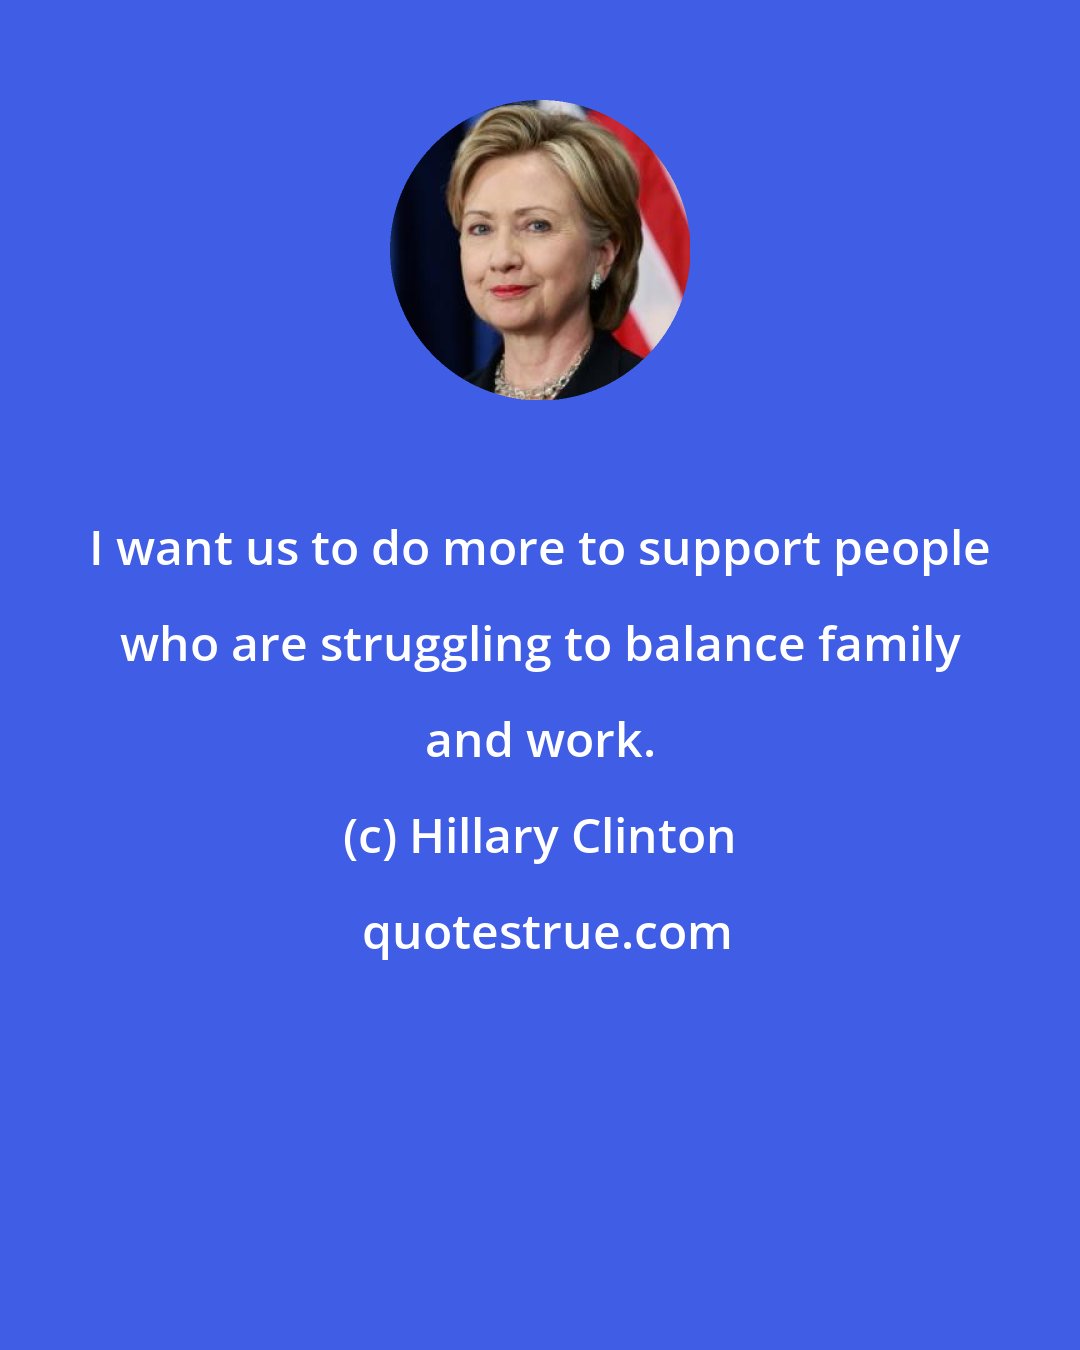 Hillary Clinton: I want us to do more to support people who are struggling to balance family and work.